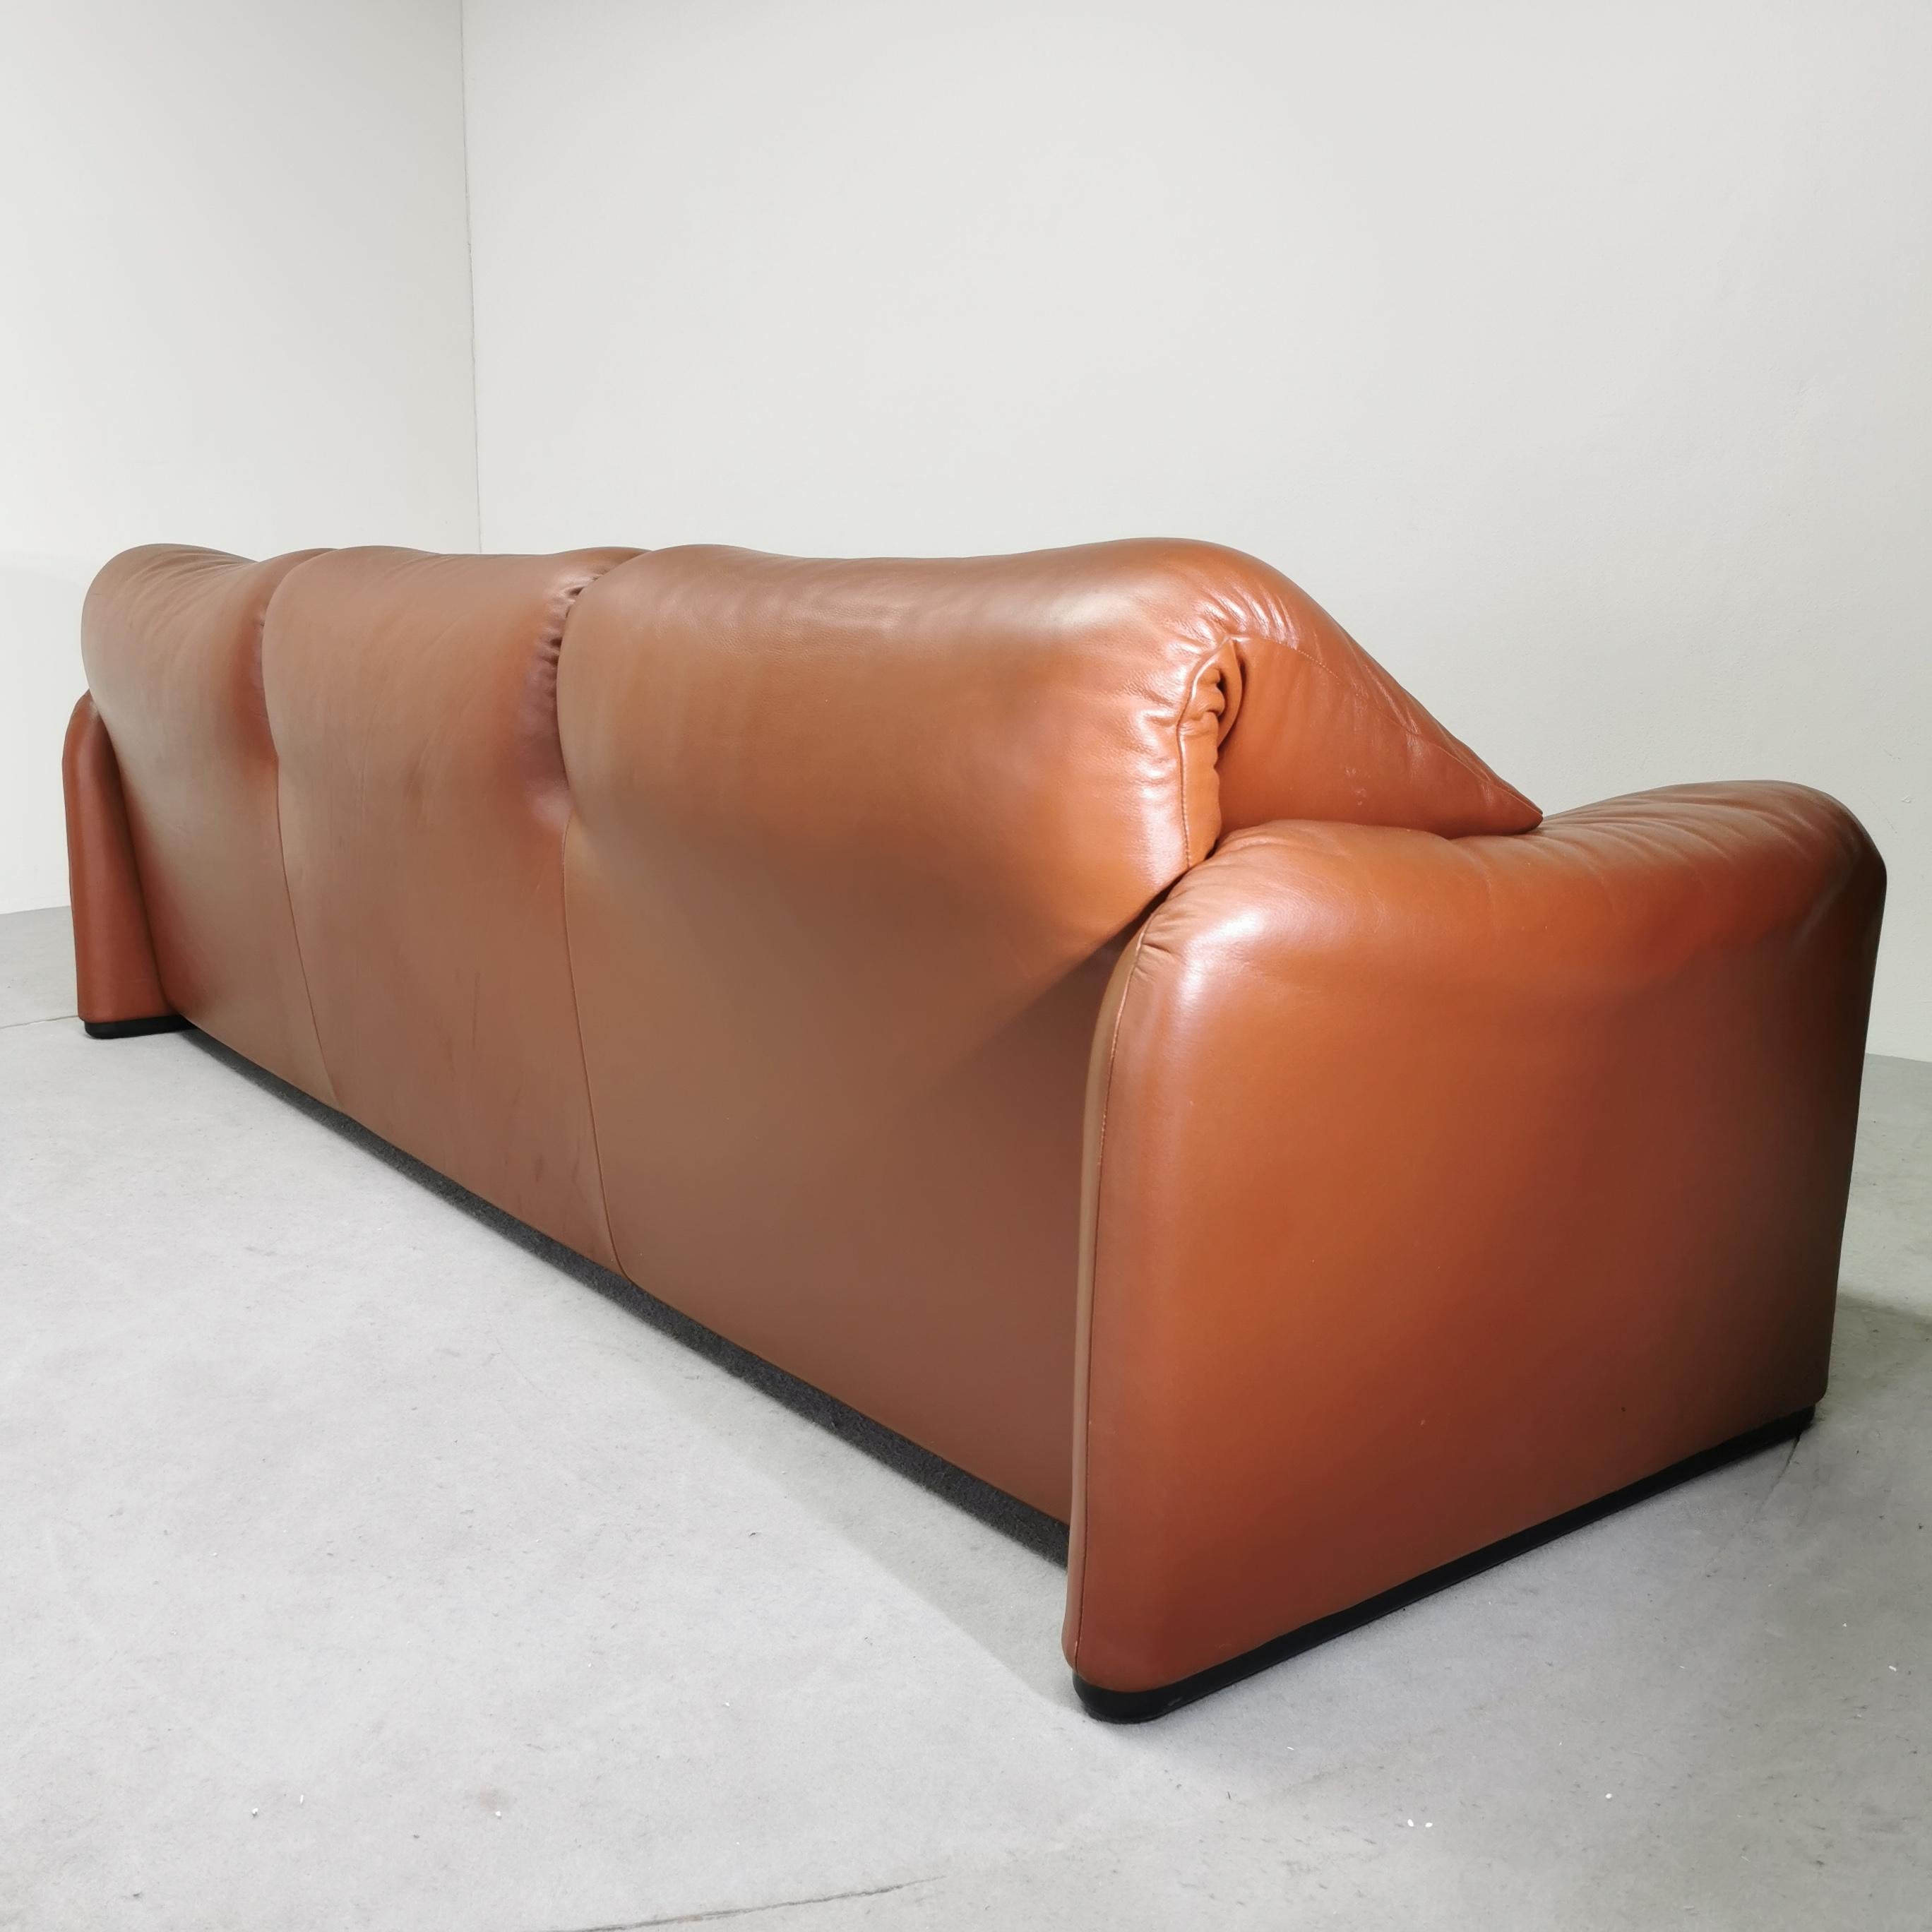 Other Maralunga sofa Cassina 70's leather For Sale